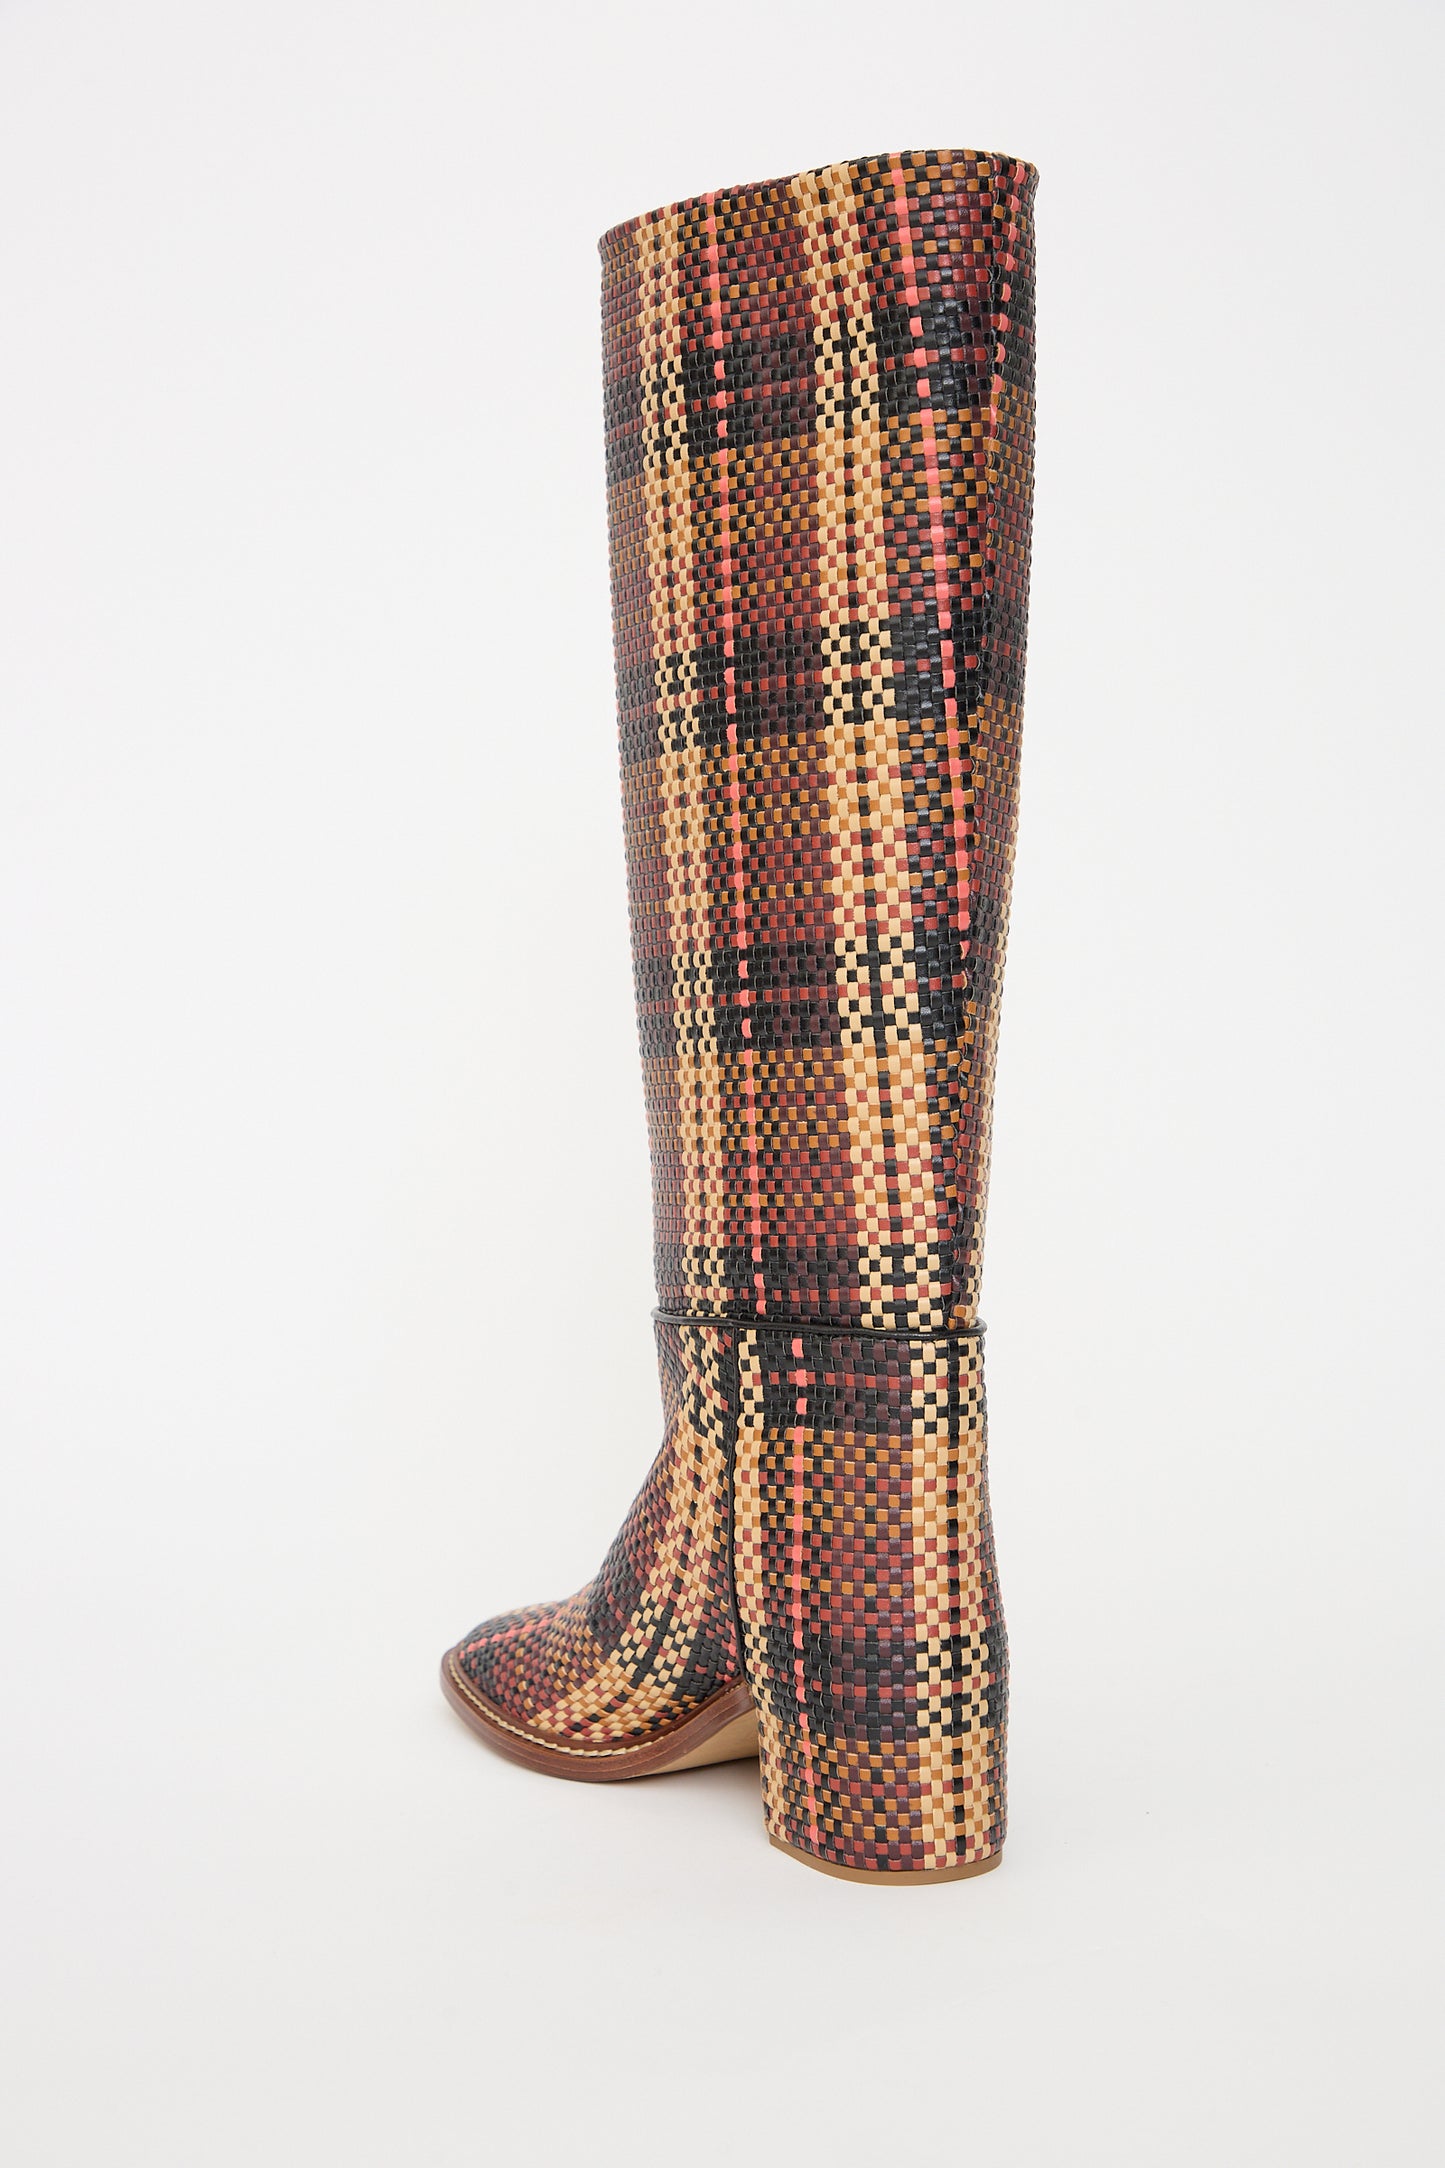 Tall, multicolored checkered-pattern vegan leather Ulla Johnson Elena Woven Riding Boots in Brown against a white background.